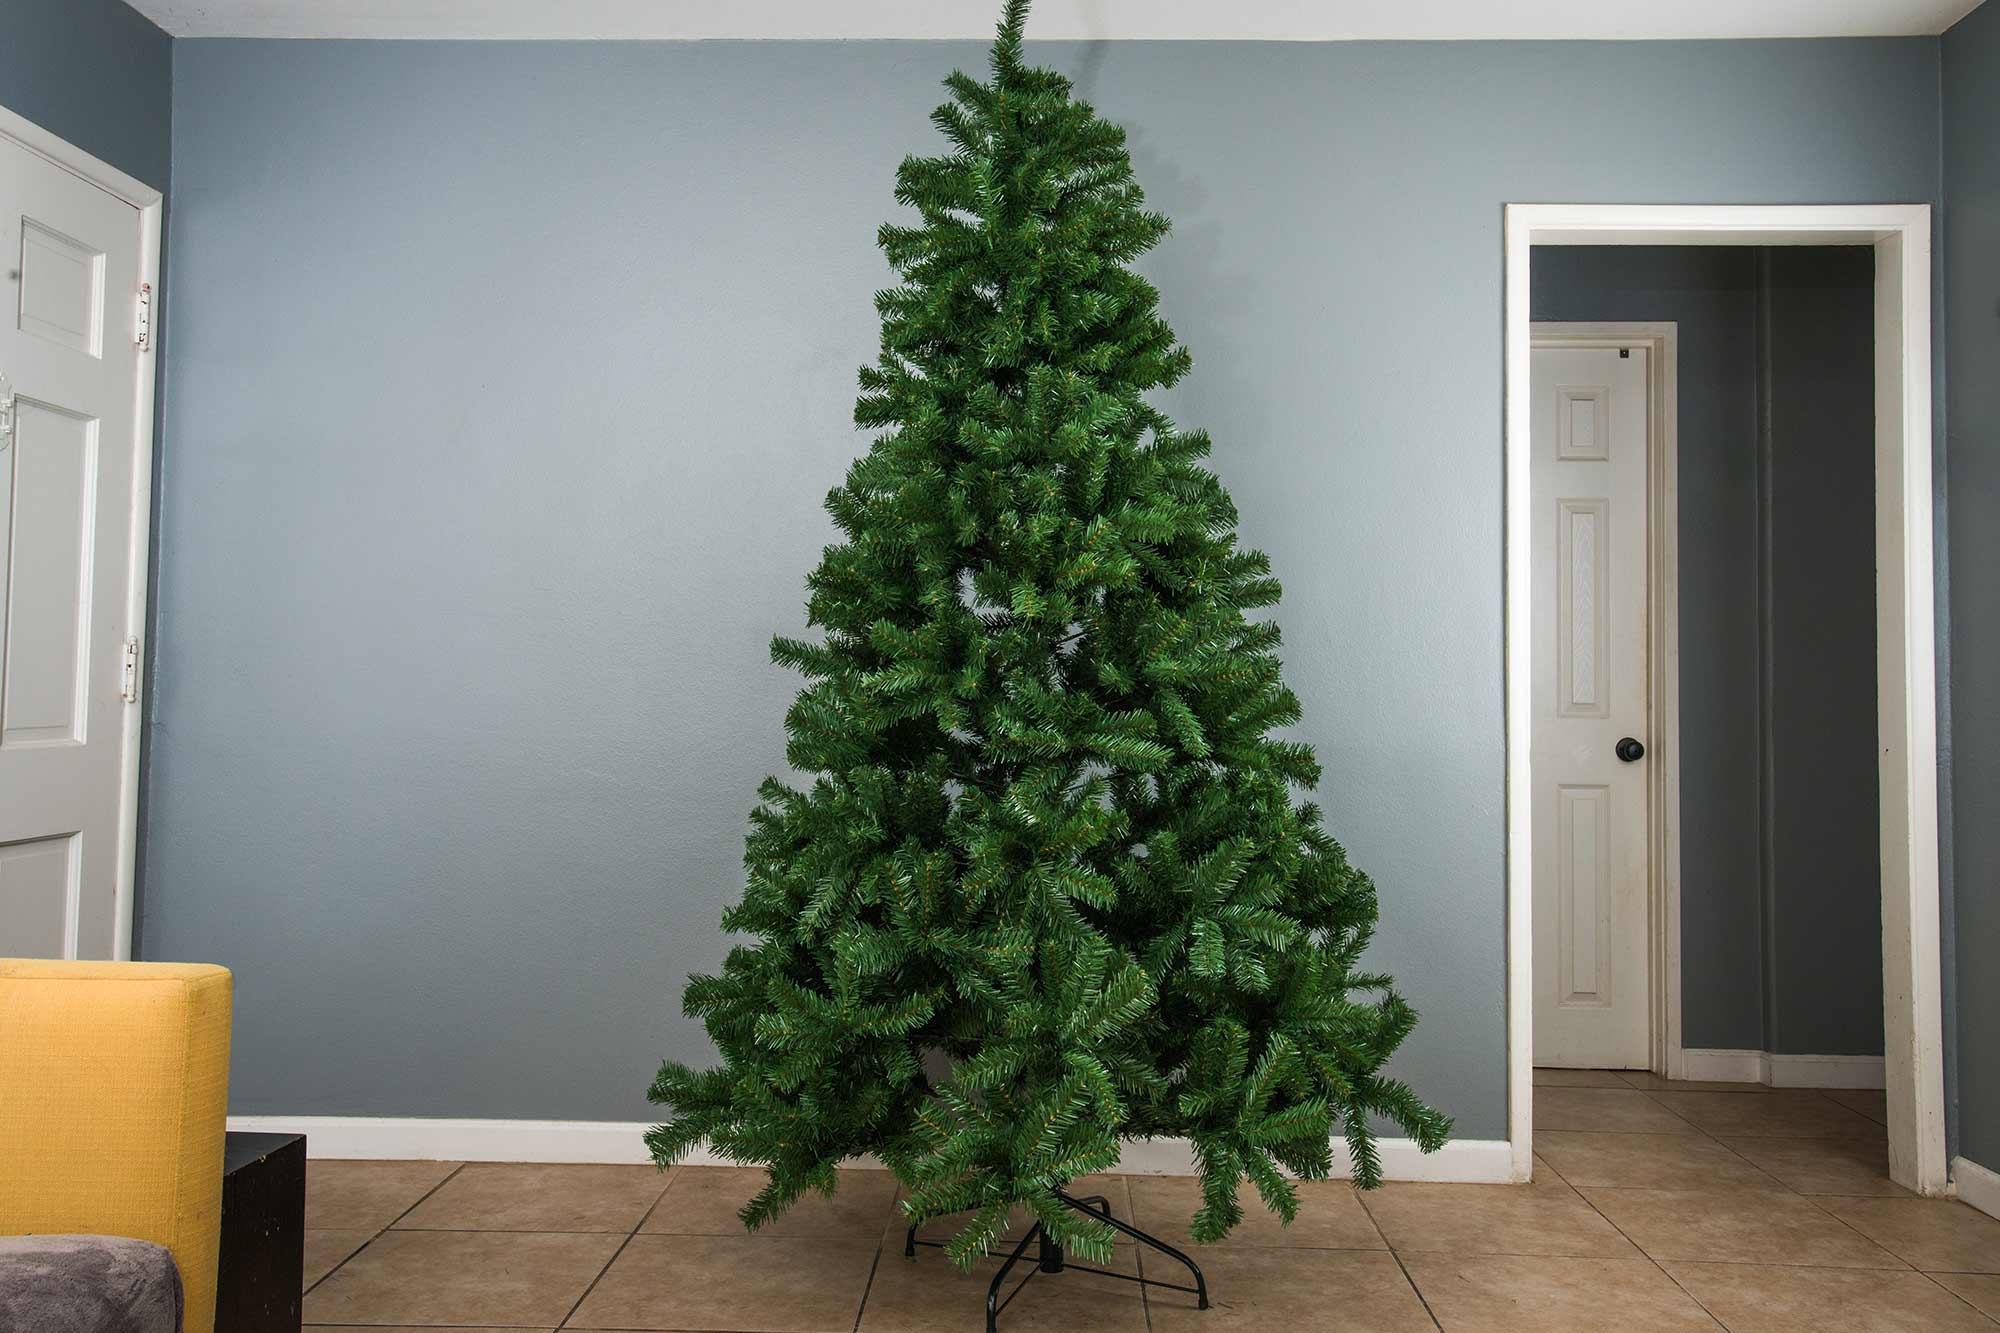 Best Choice Products tree